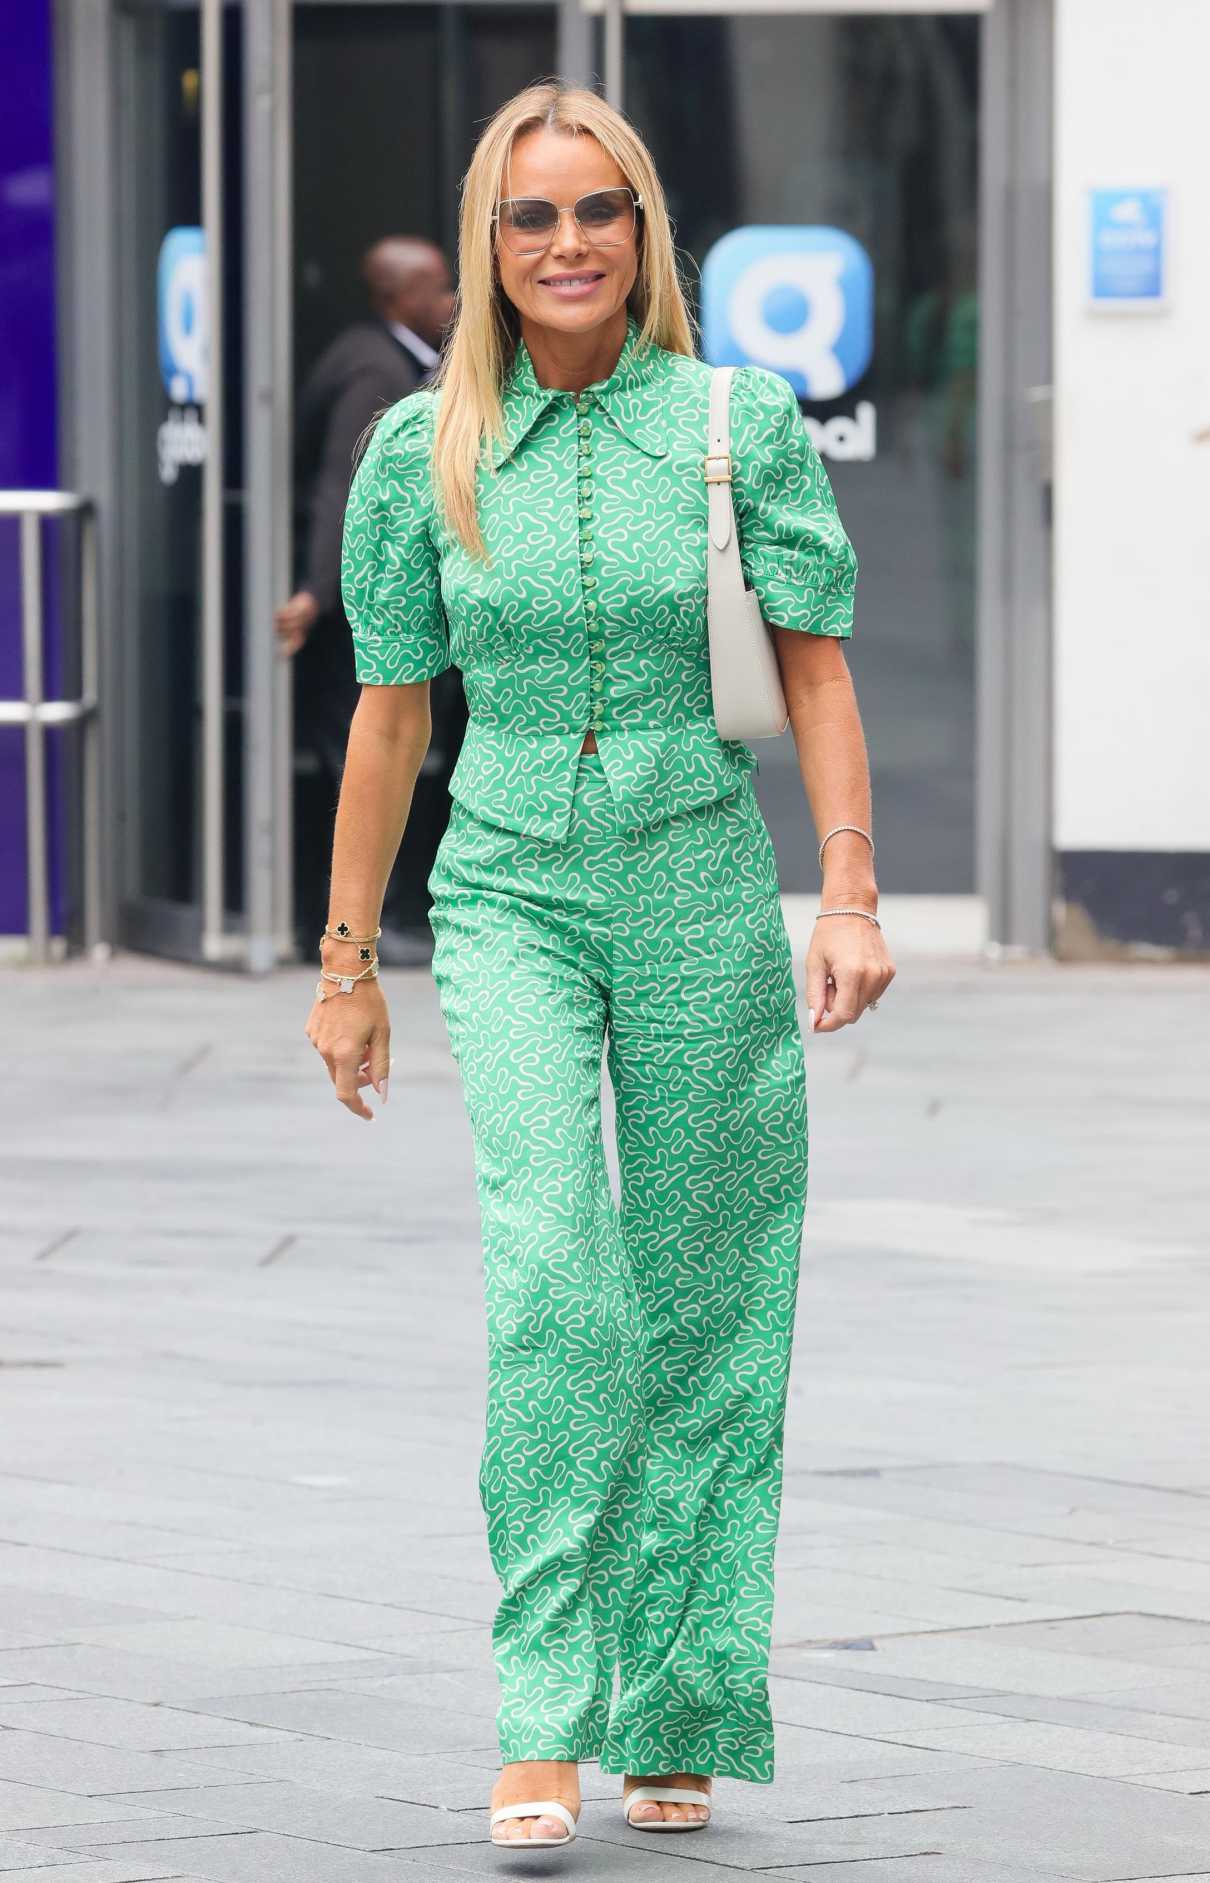 Amanda Holden in a Green Patterned Pantsuit